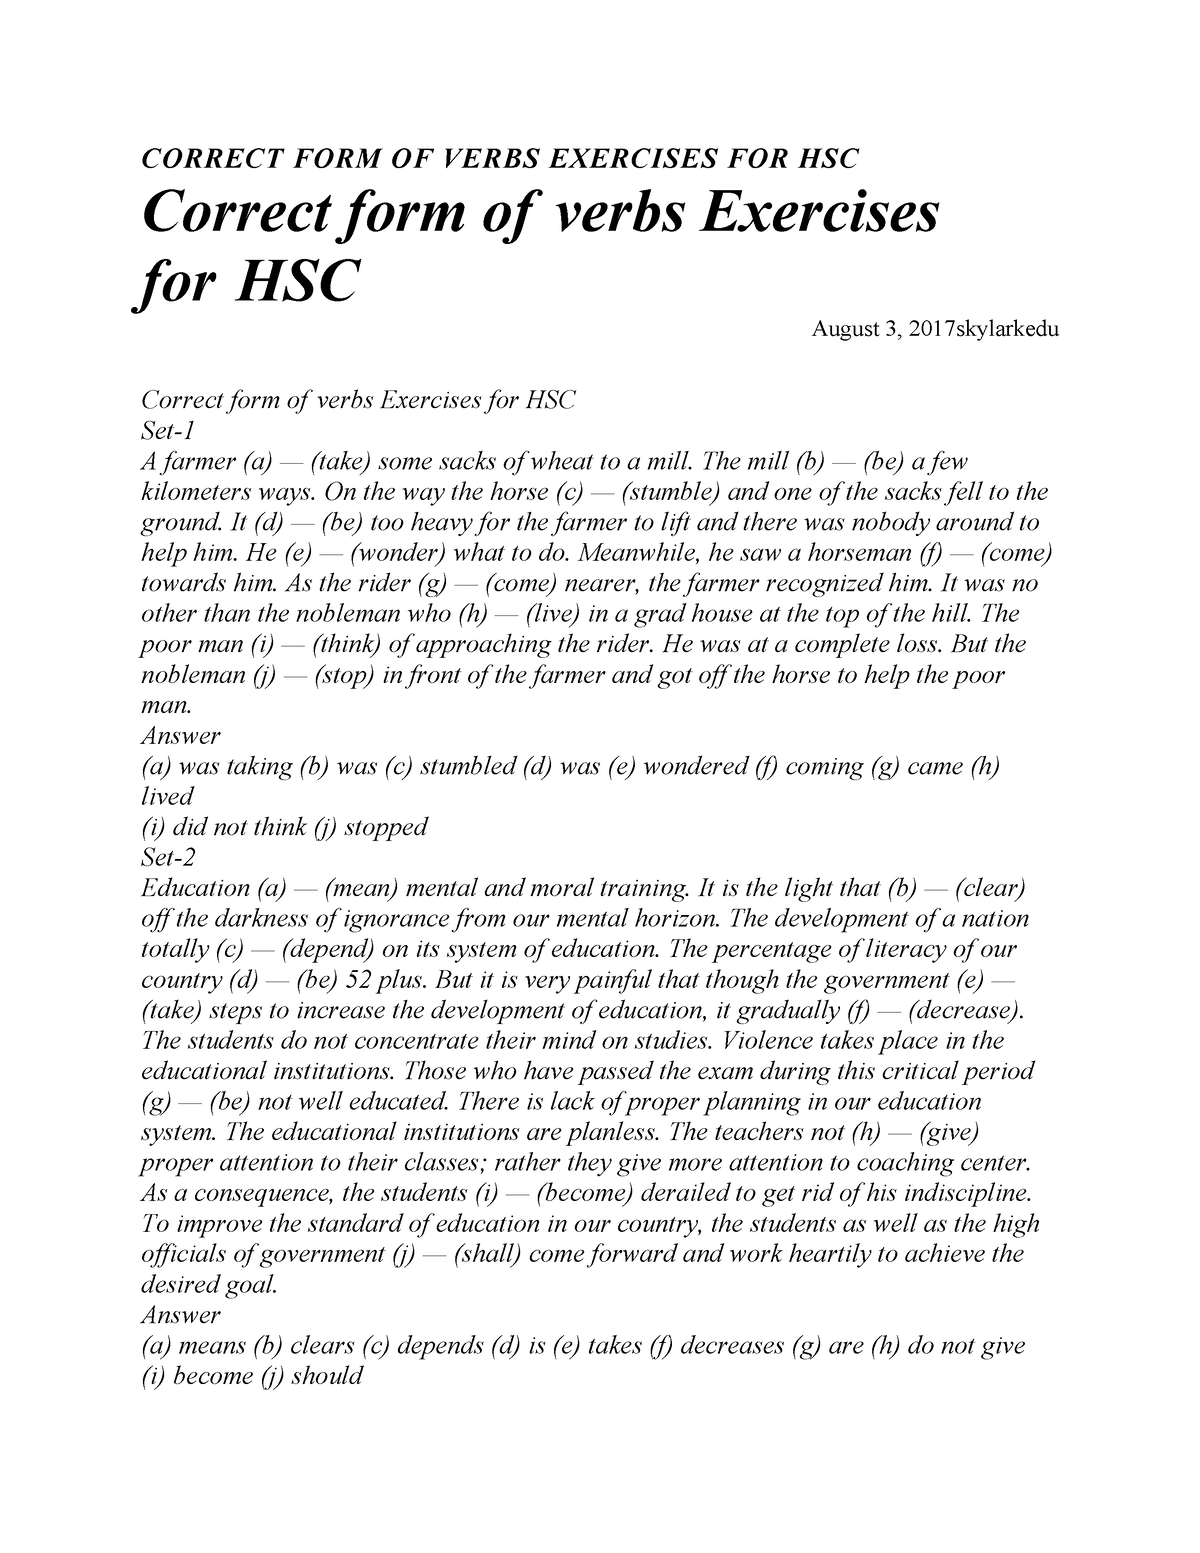 538828626-5-correct-form-of-verbs-exercises-for-hsc-correct-form-of